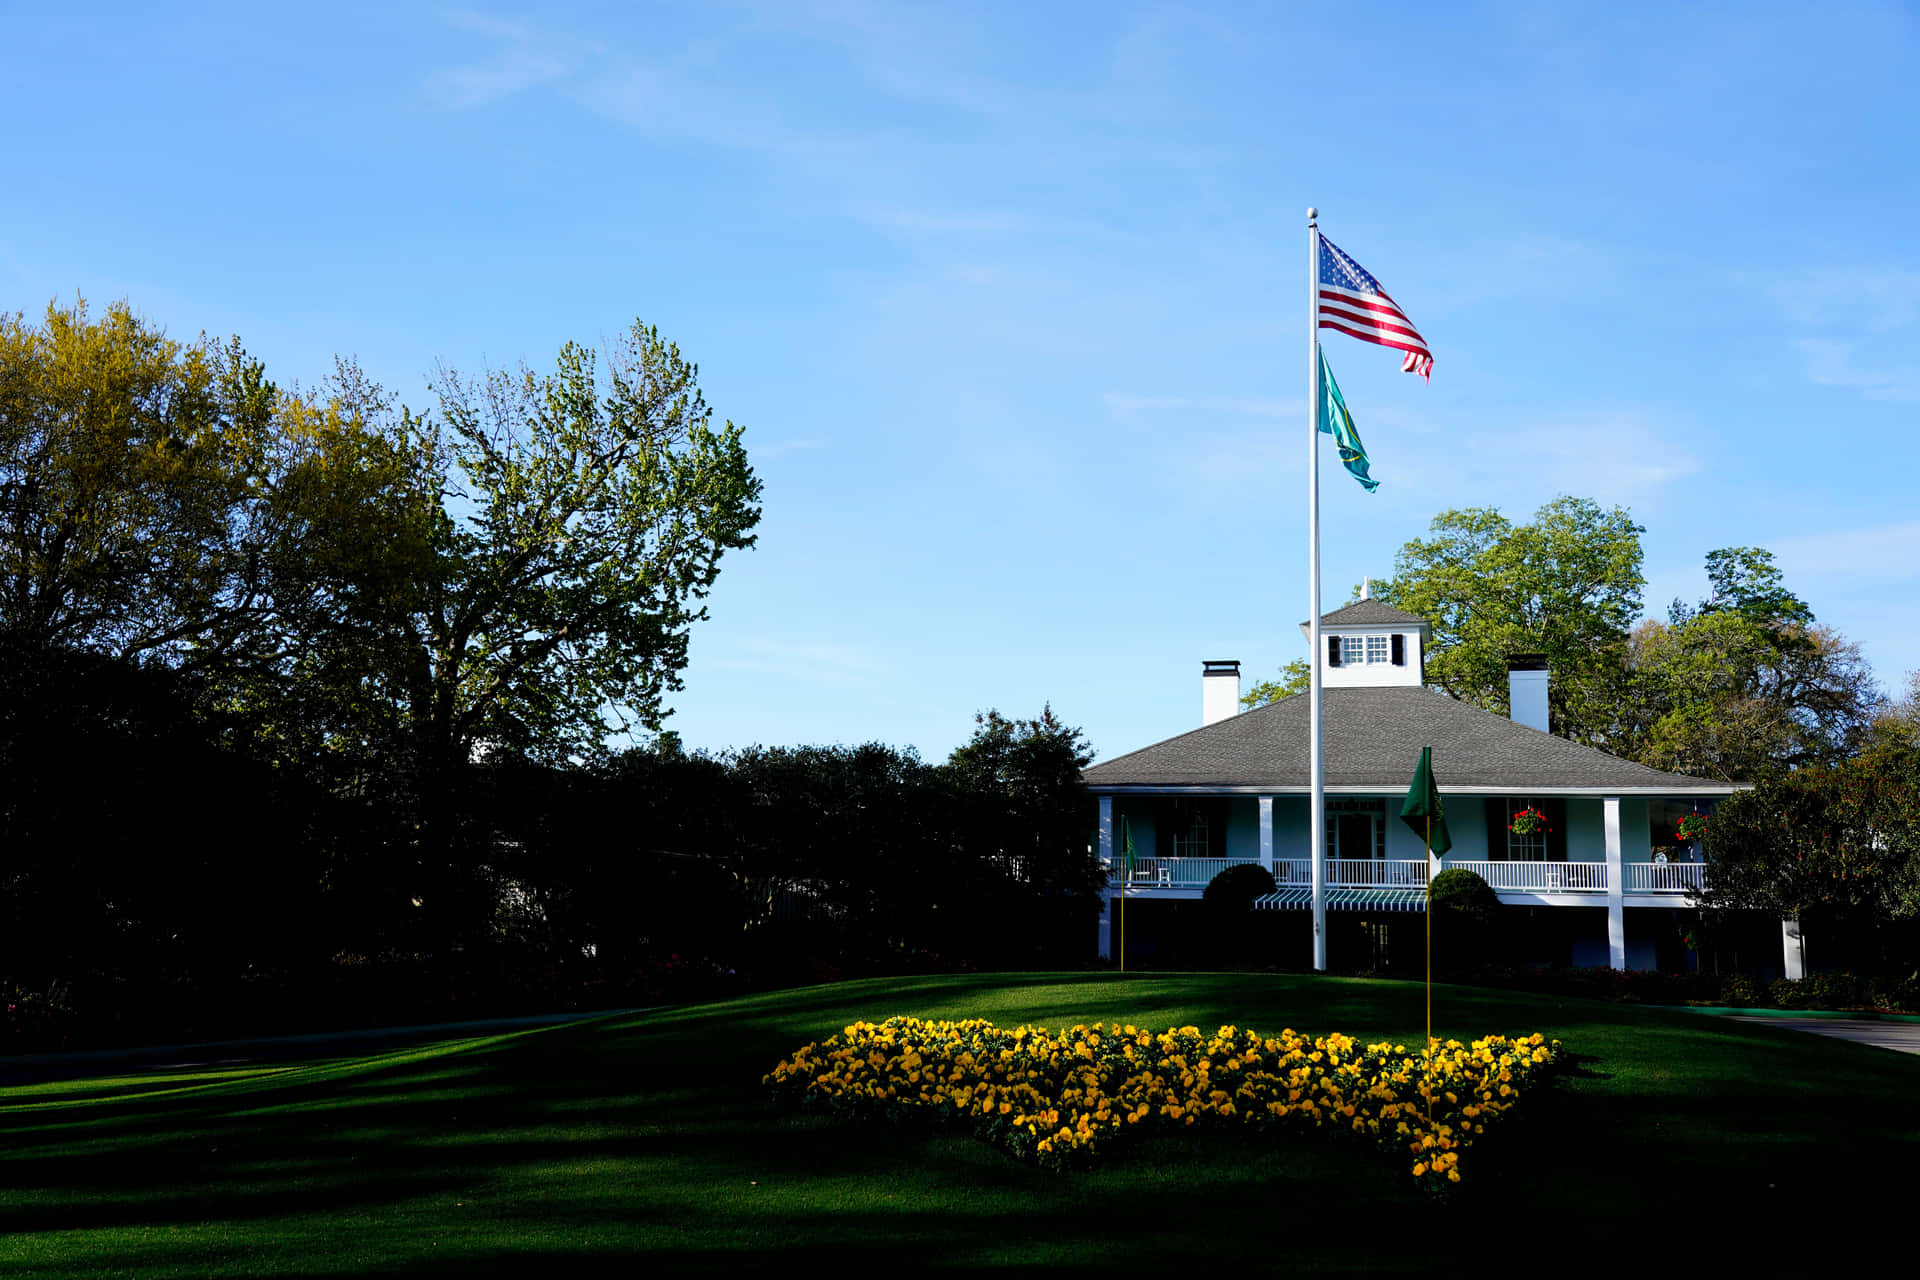 Tee off at the famous Augusta National golf course, now available on your iphone! Wallpaper